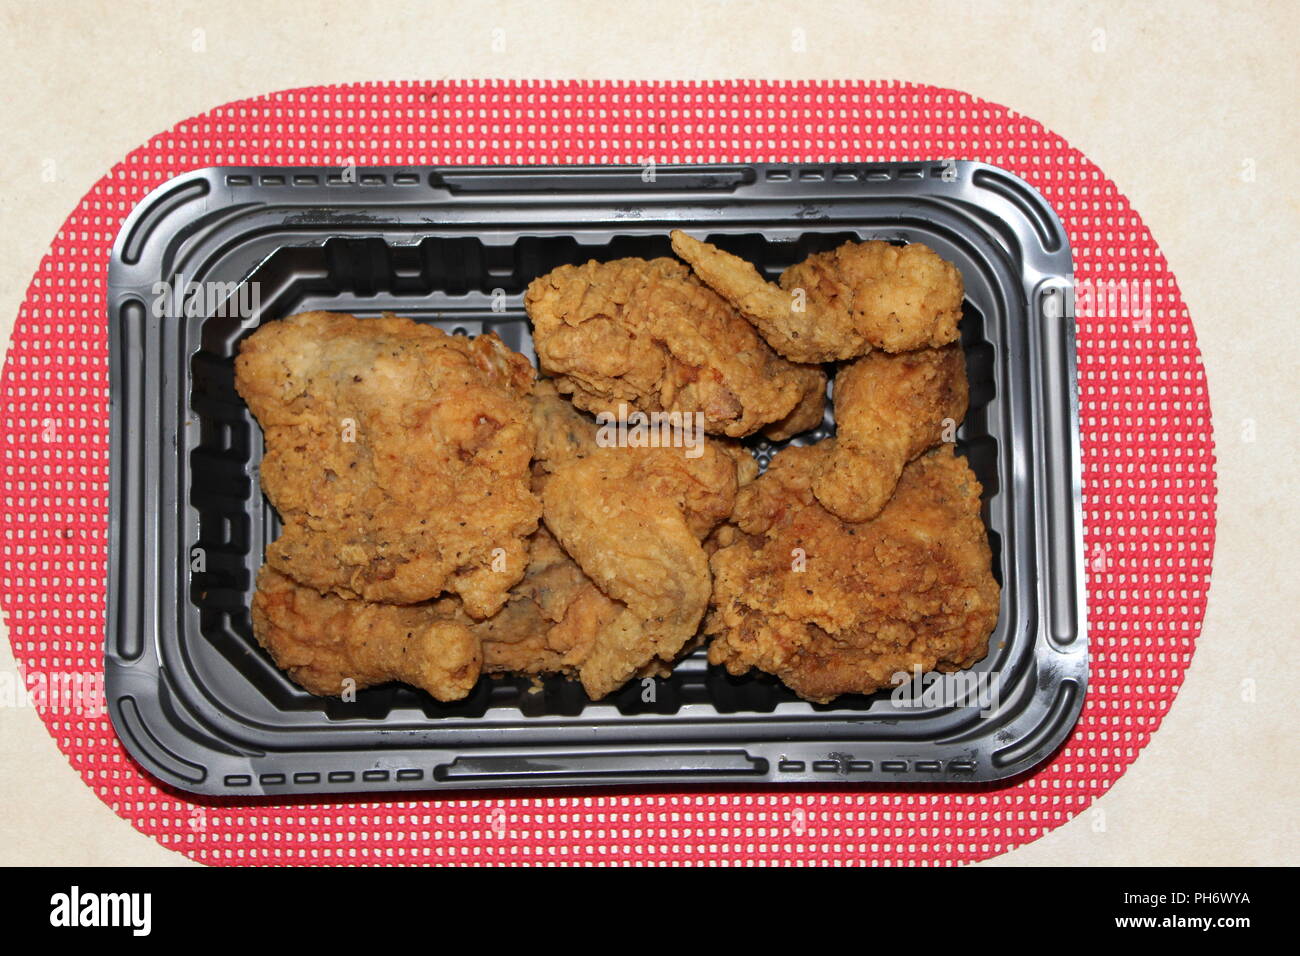 Fried Chicken In A Tray Stock Photo